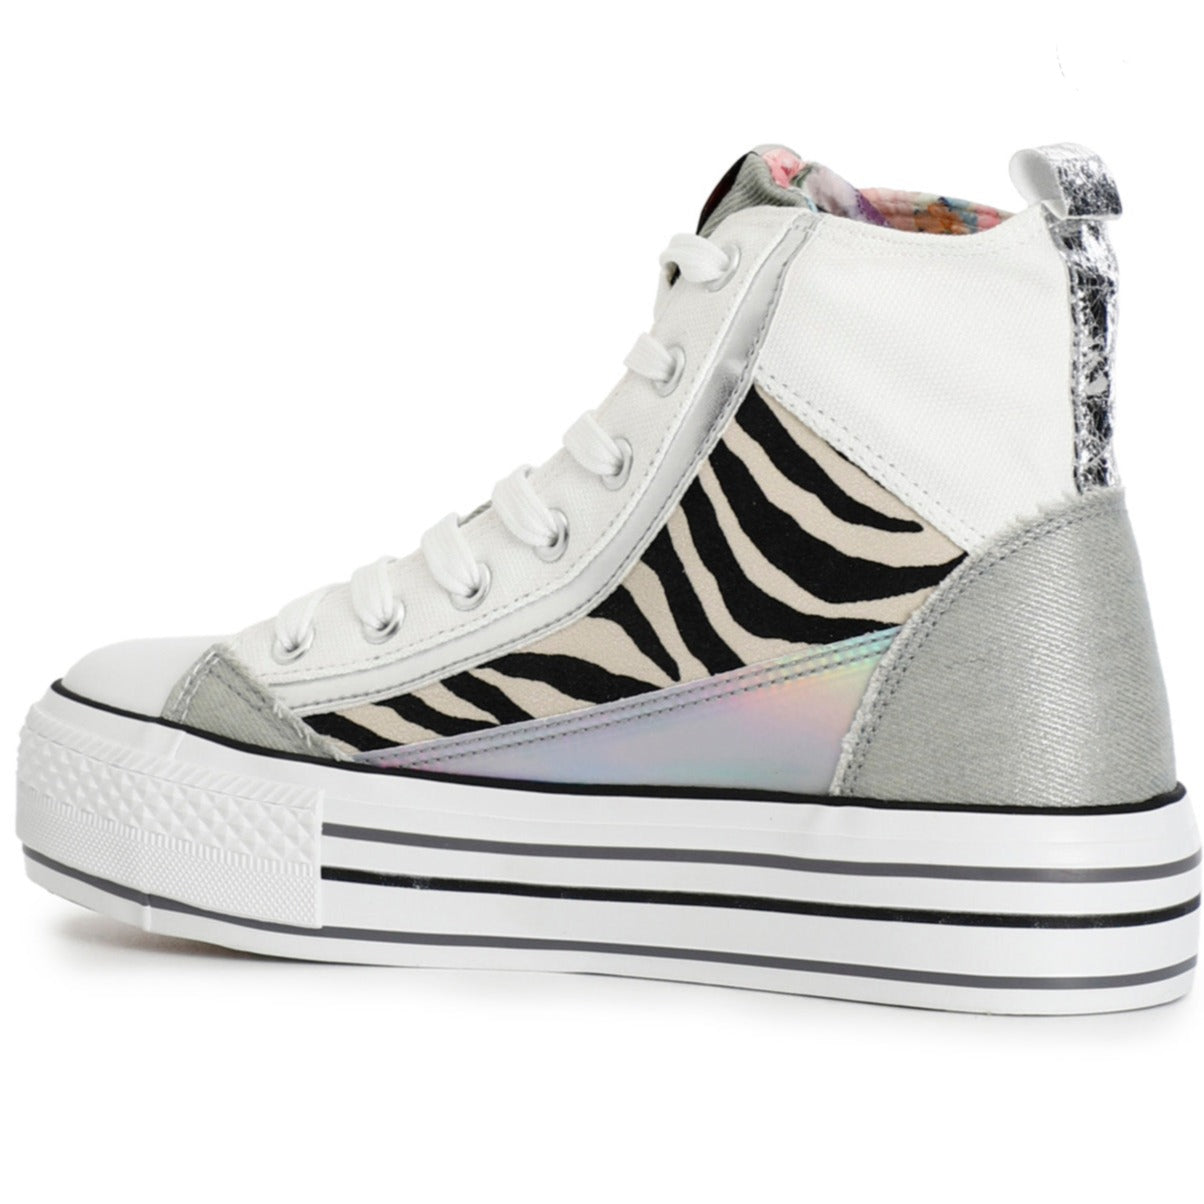 Sneakers CafèNoir woman white fabric zebra and silver inserts